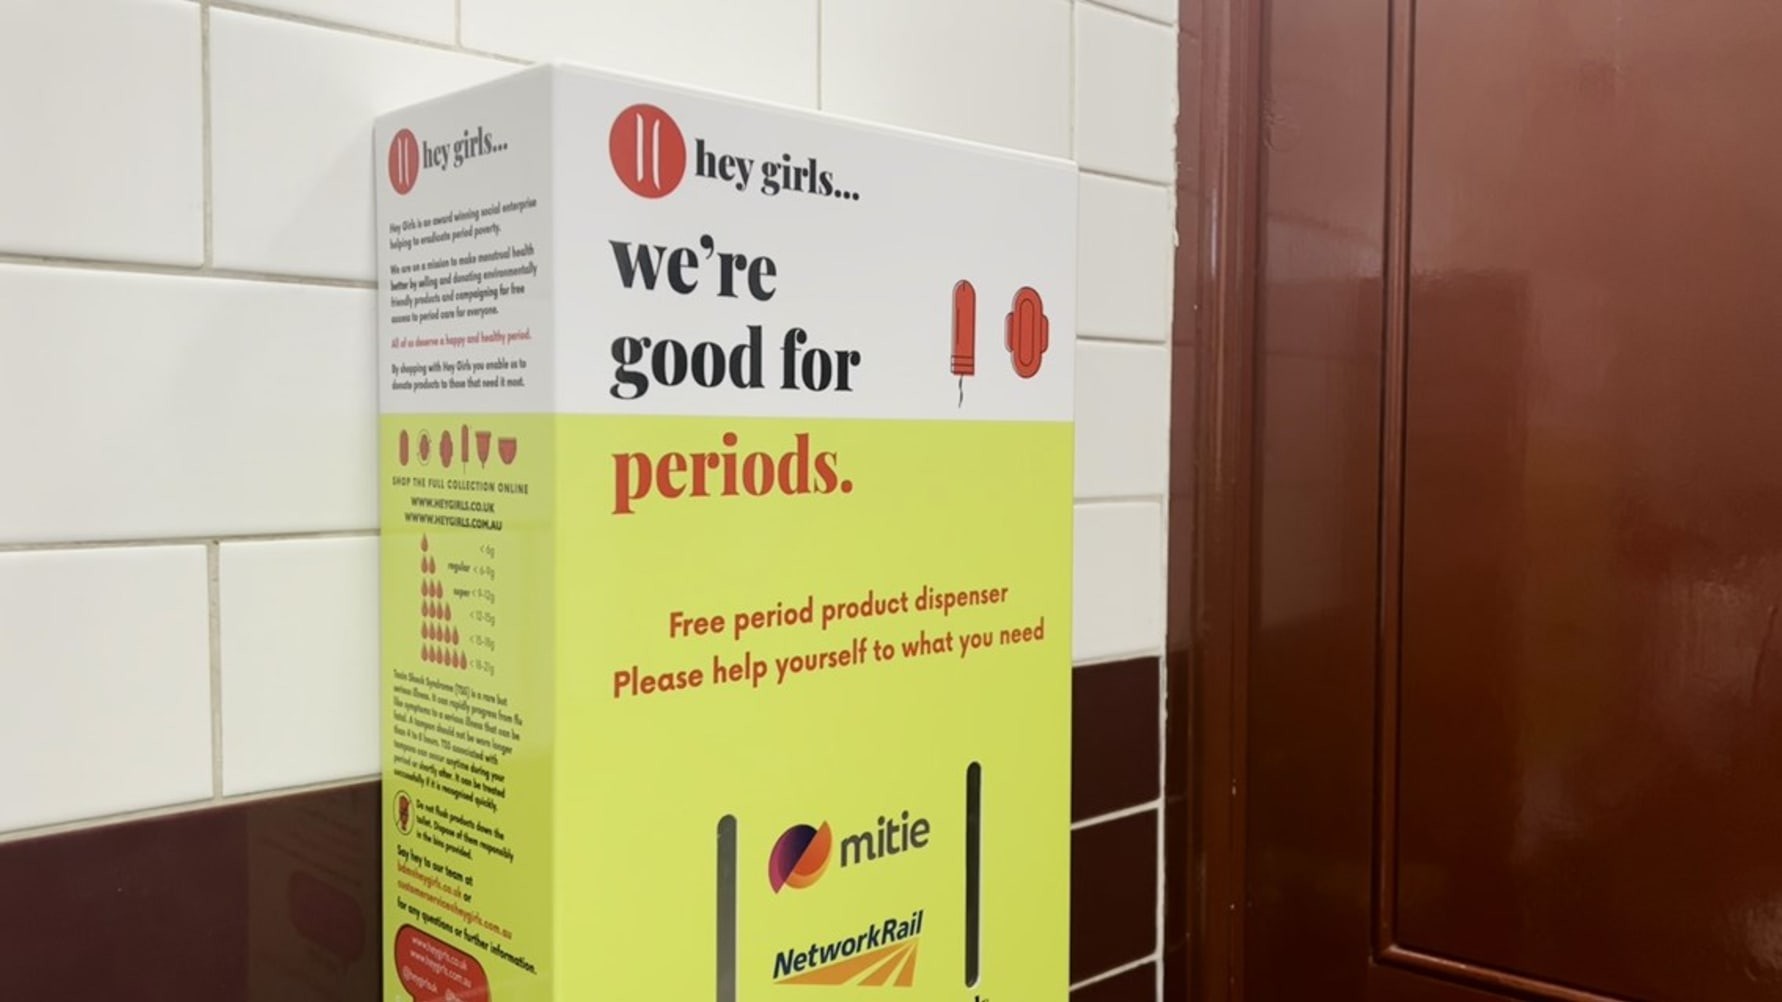 Birmingham railway stations to provide free sanitary products